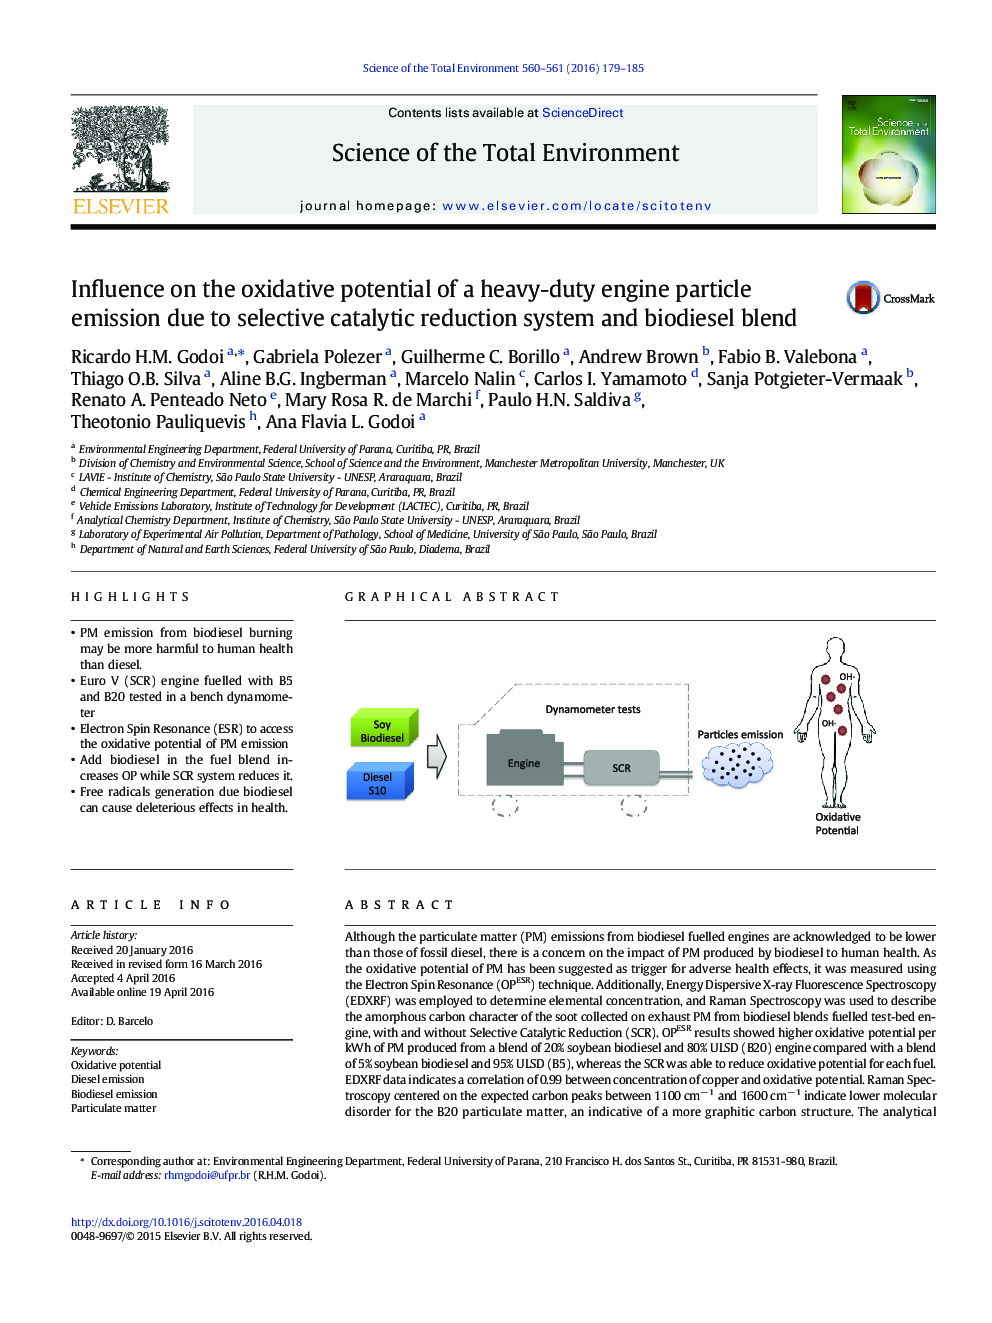 Influence on the oxidative potential of a heavy-duty engine particle emission due to selective catalytic reduction system and biodiesel blend